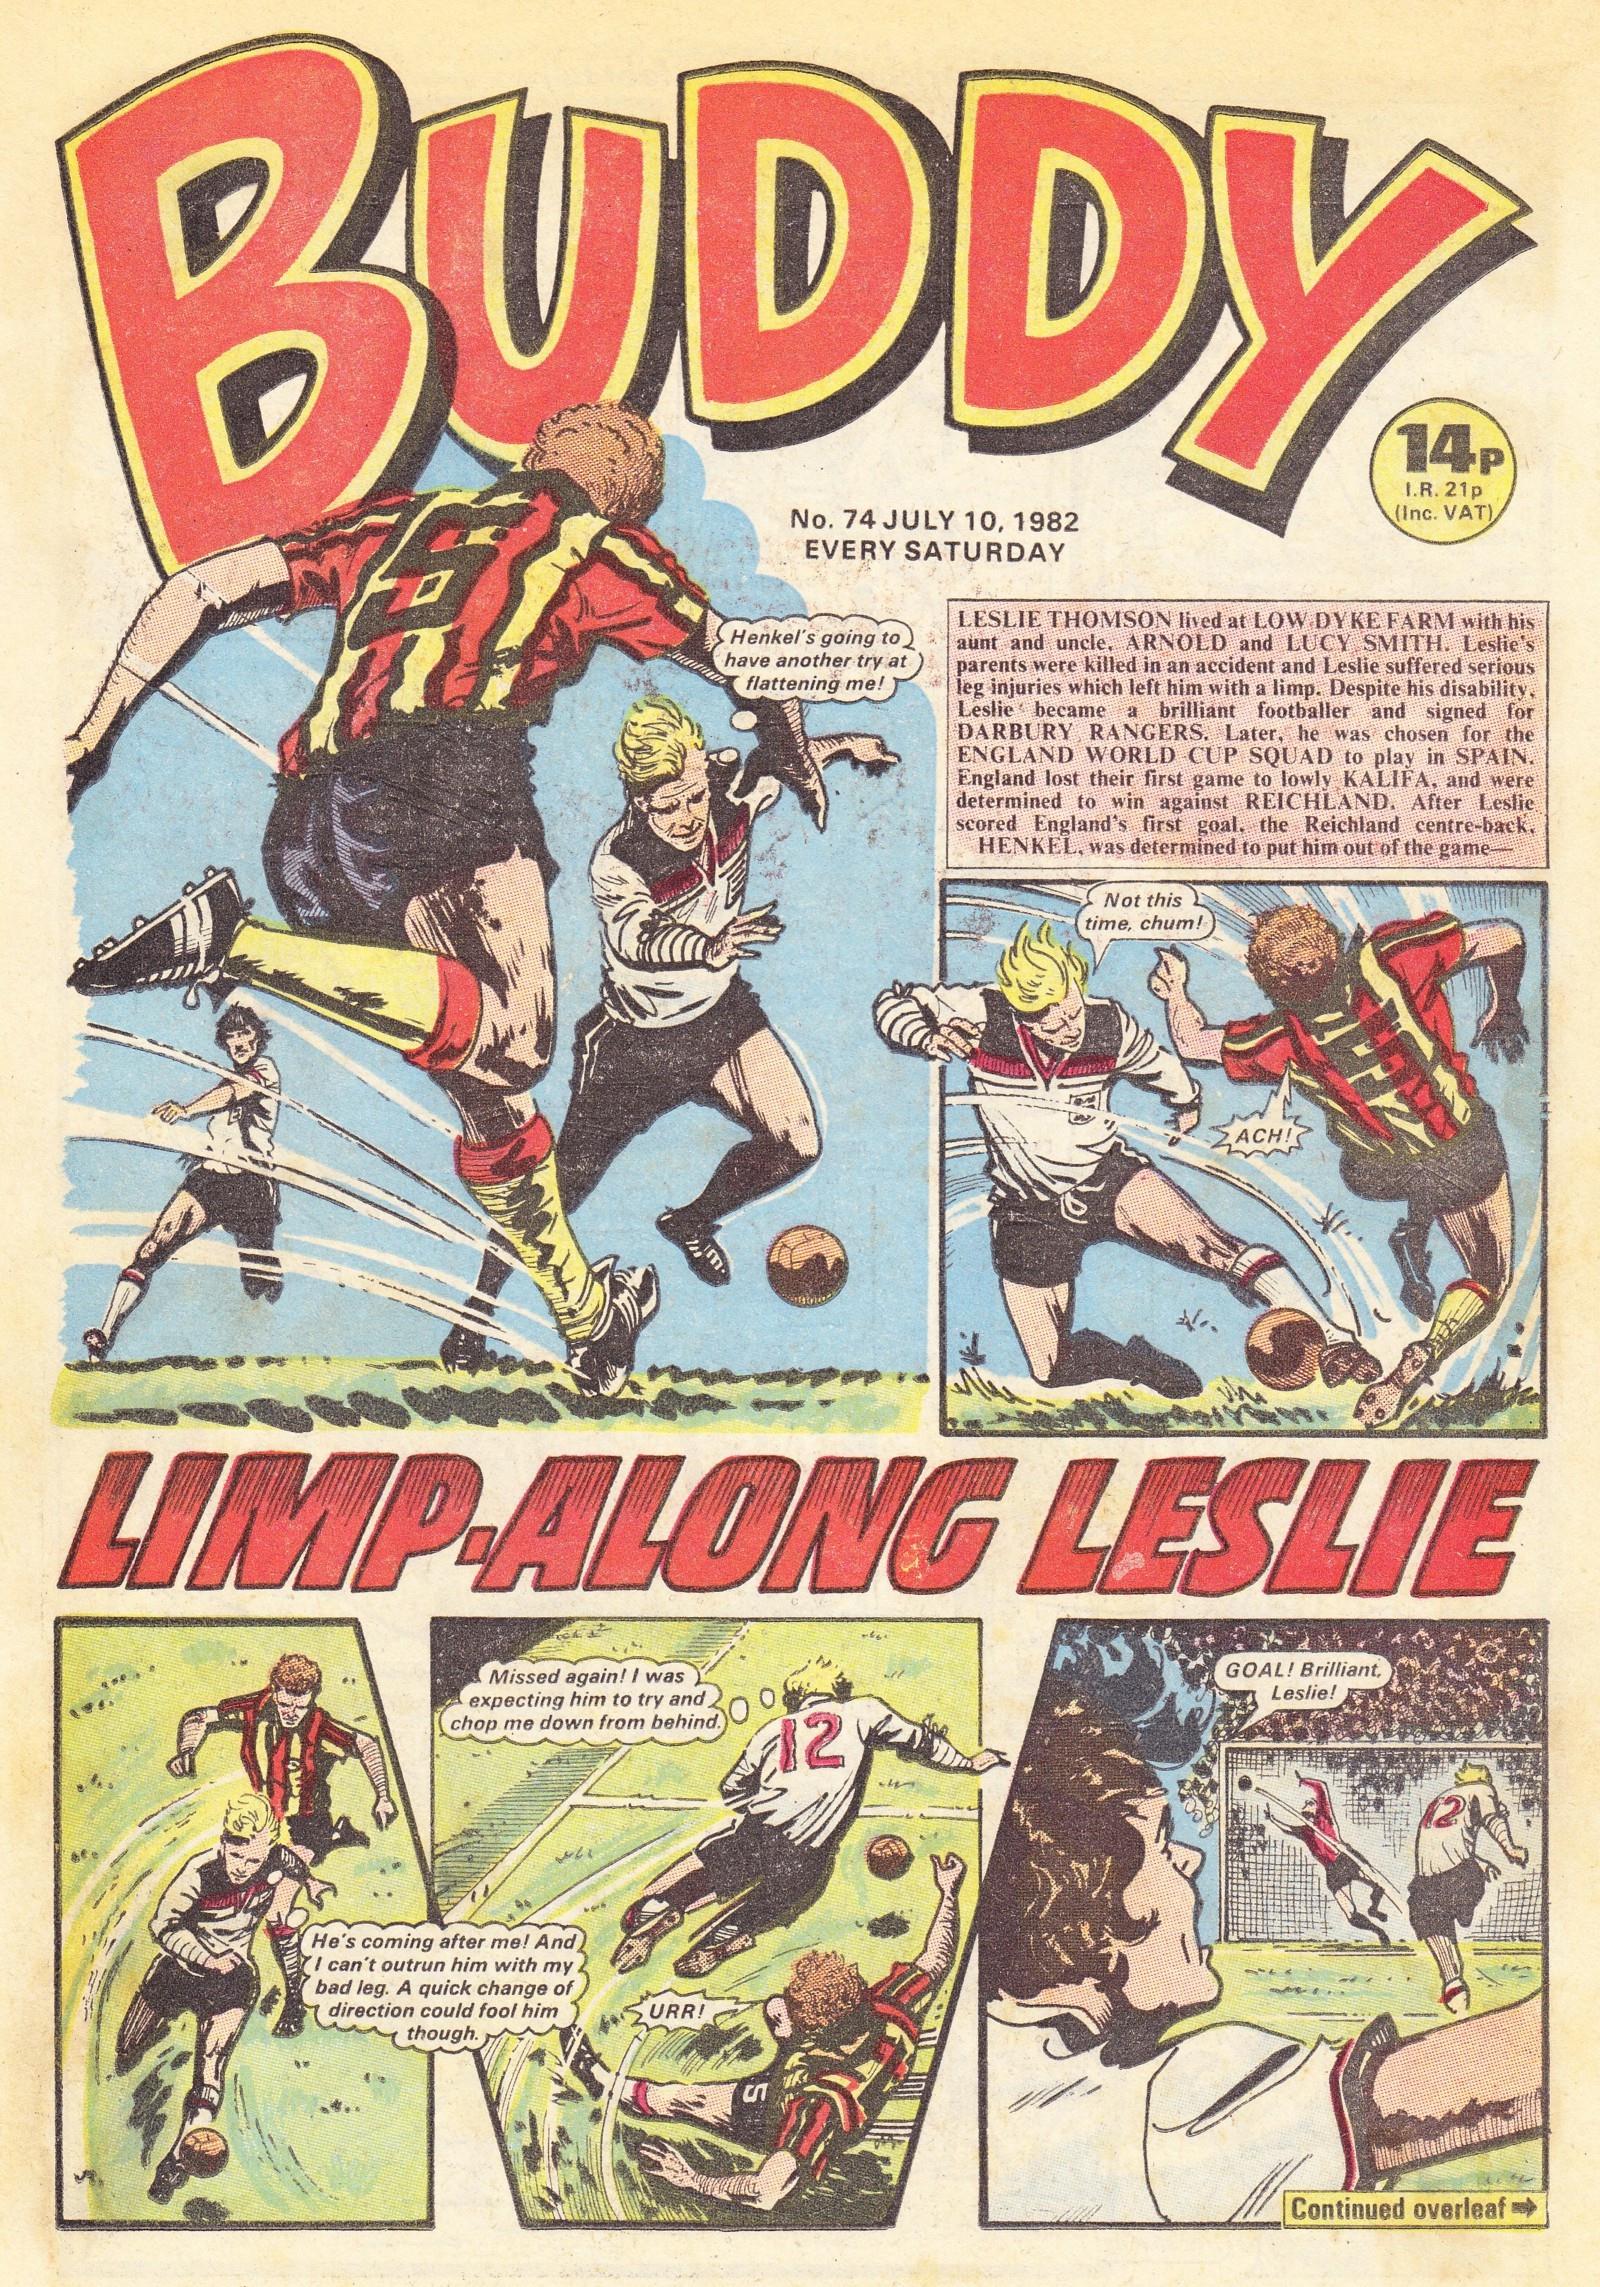 Read online Buddy comic -  Issue #74 - 1